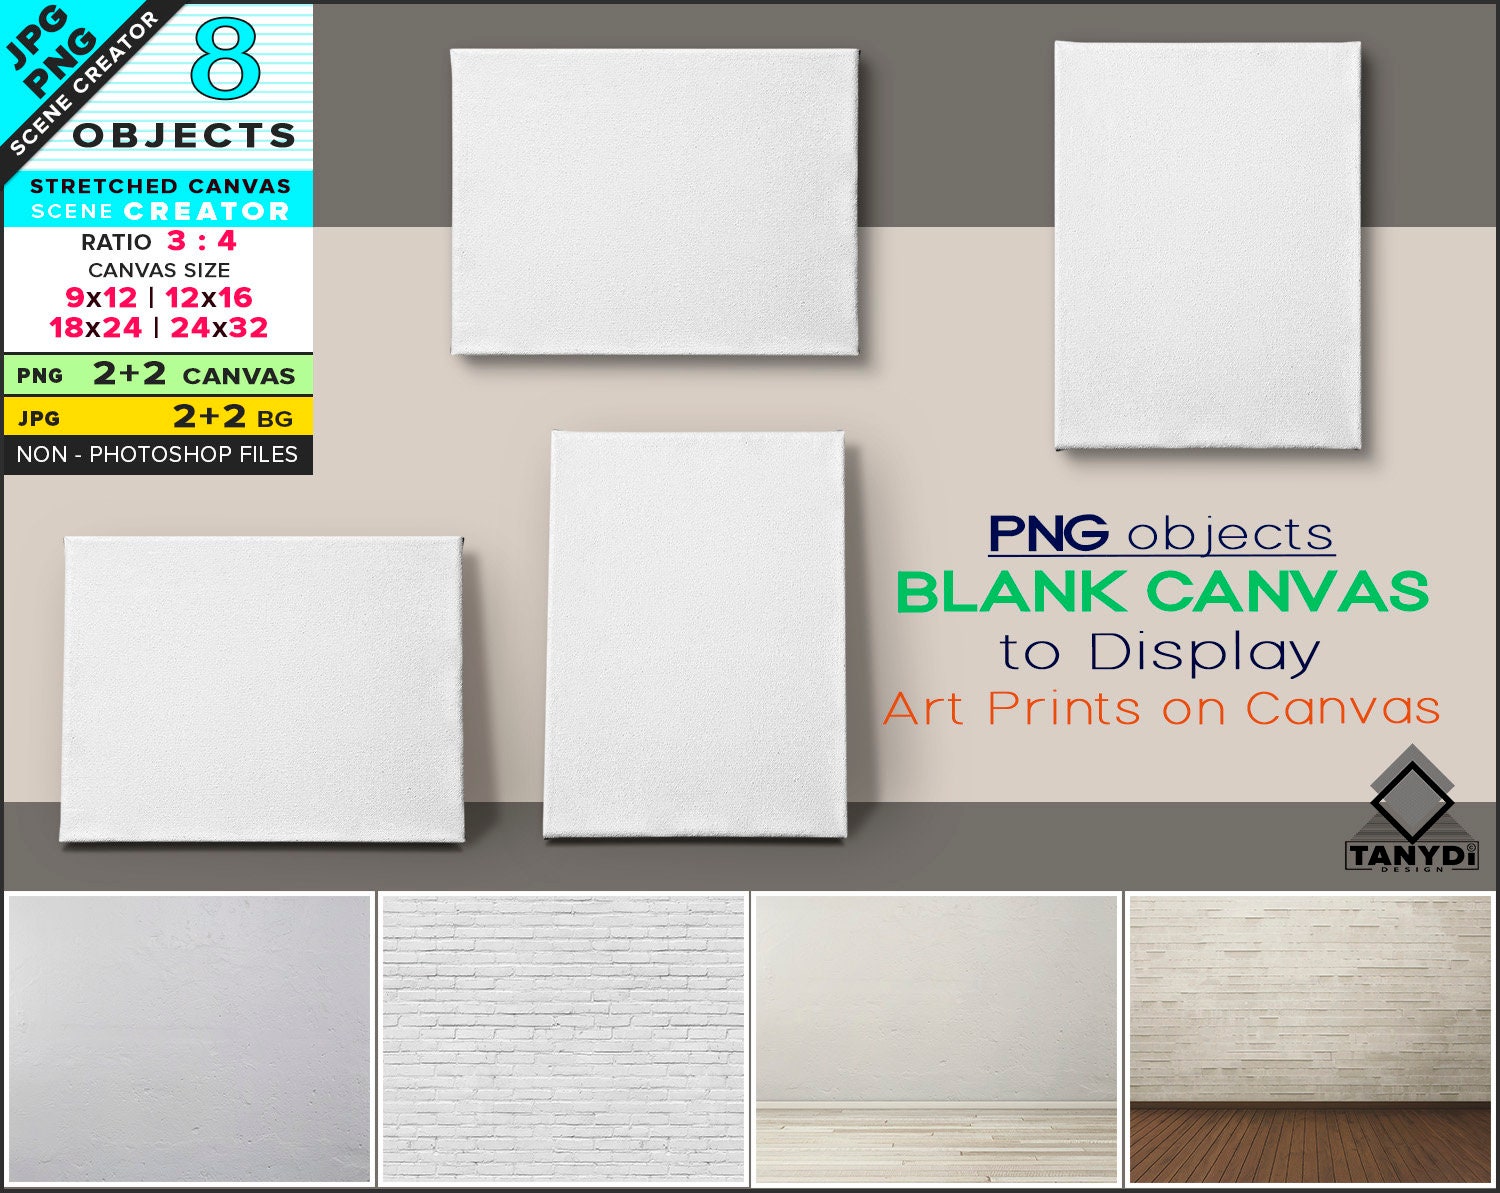 ArtSkills Stretched Canvases for Painting, 11x14 Canvas Painting Supplies  for Artists, Blank Canvas Pack, 2-Pack